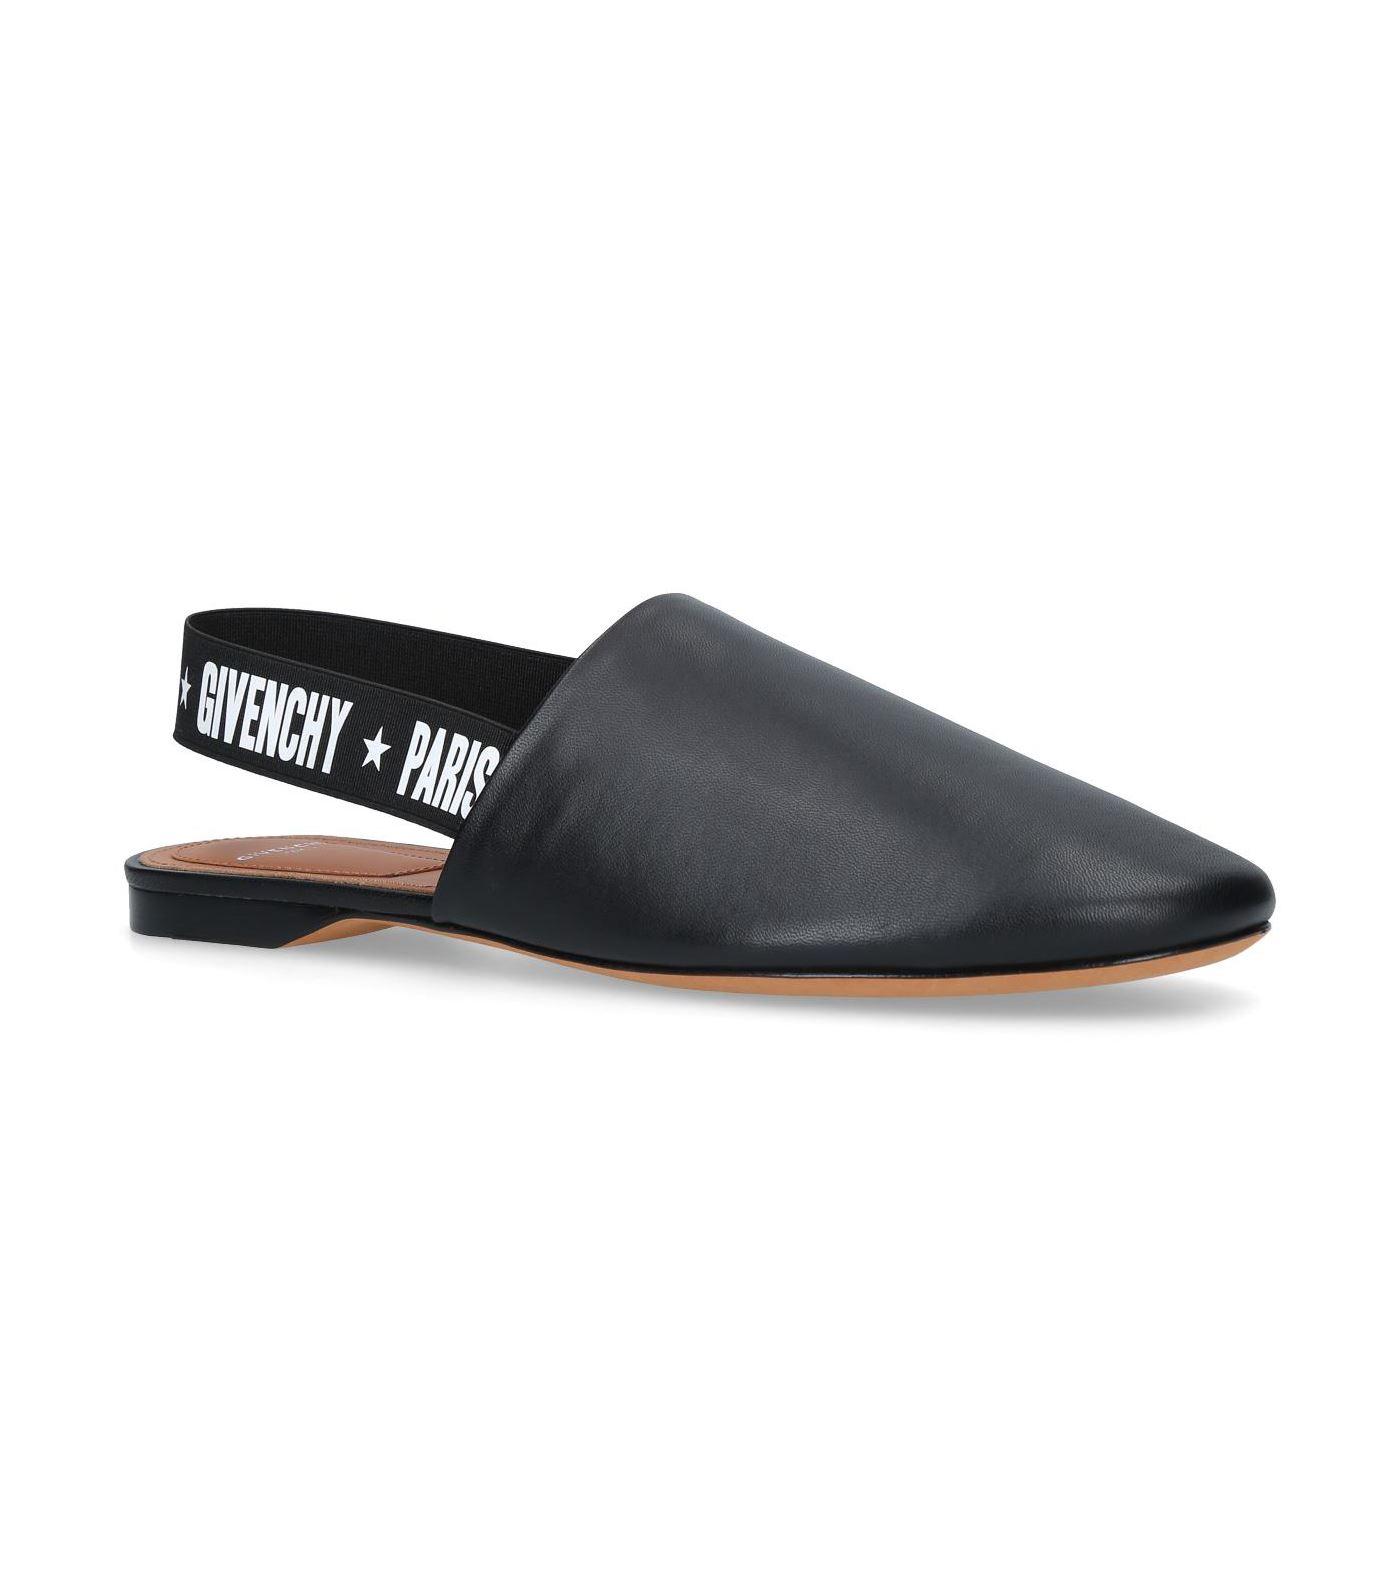 Givenchy Leather Rivington Slingback Slippers in Black - Lyst